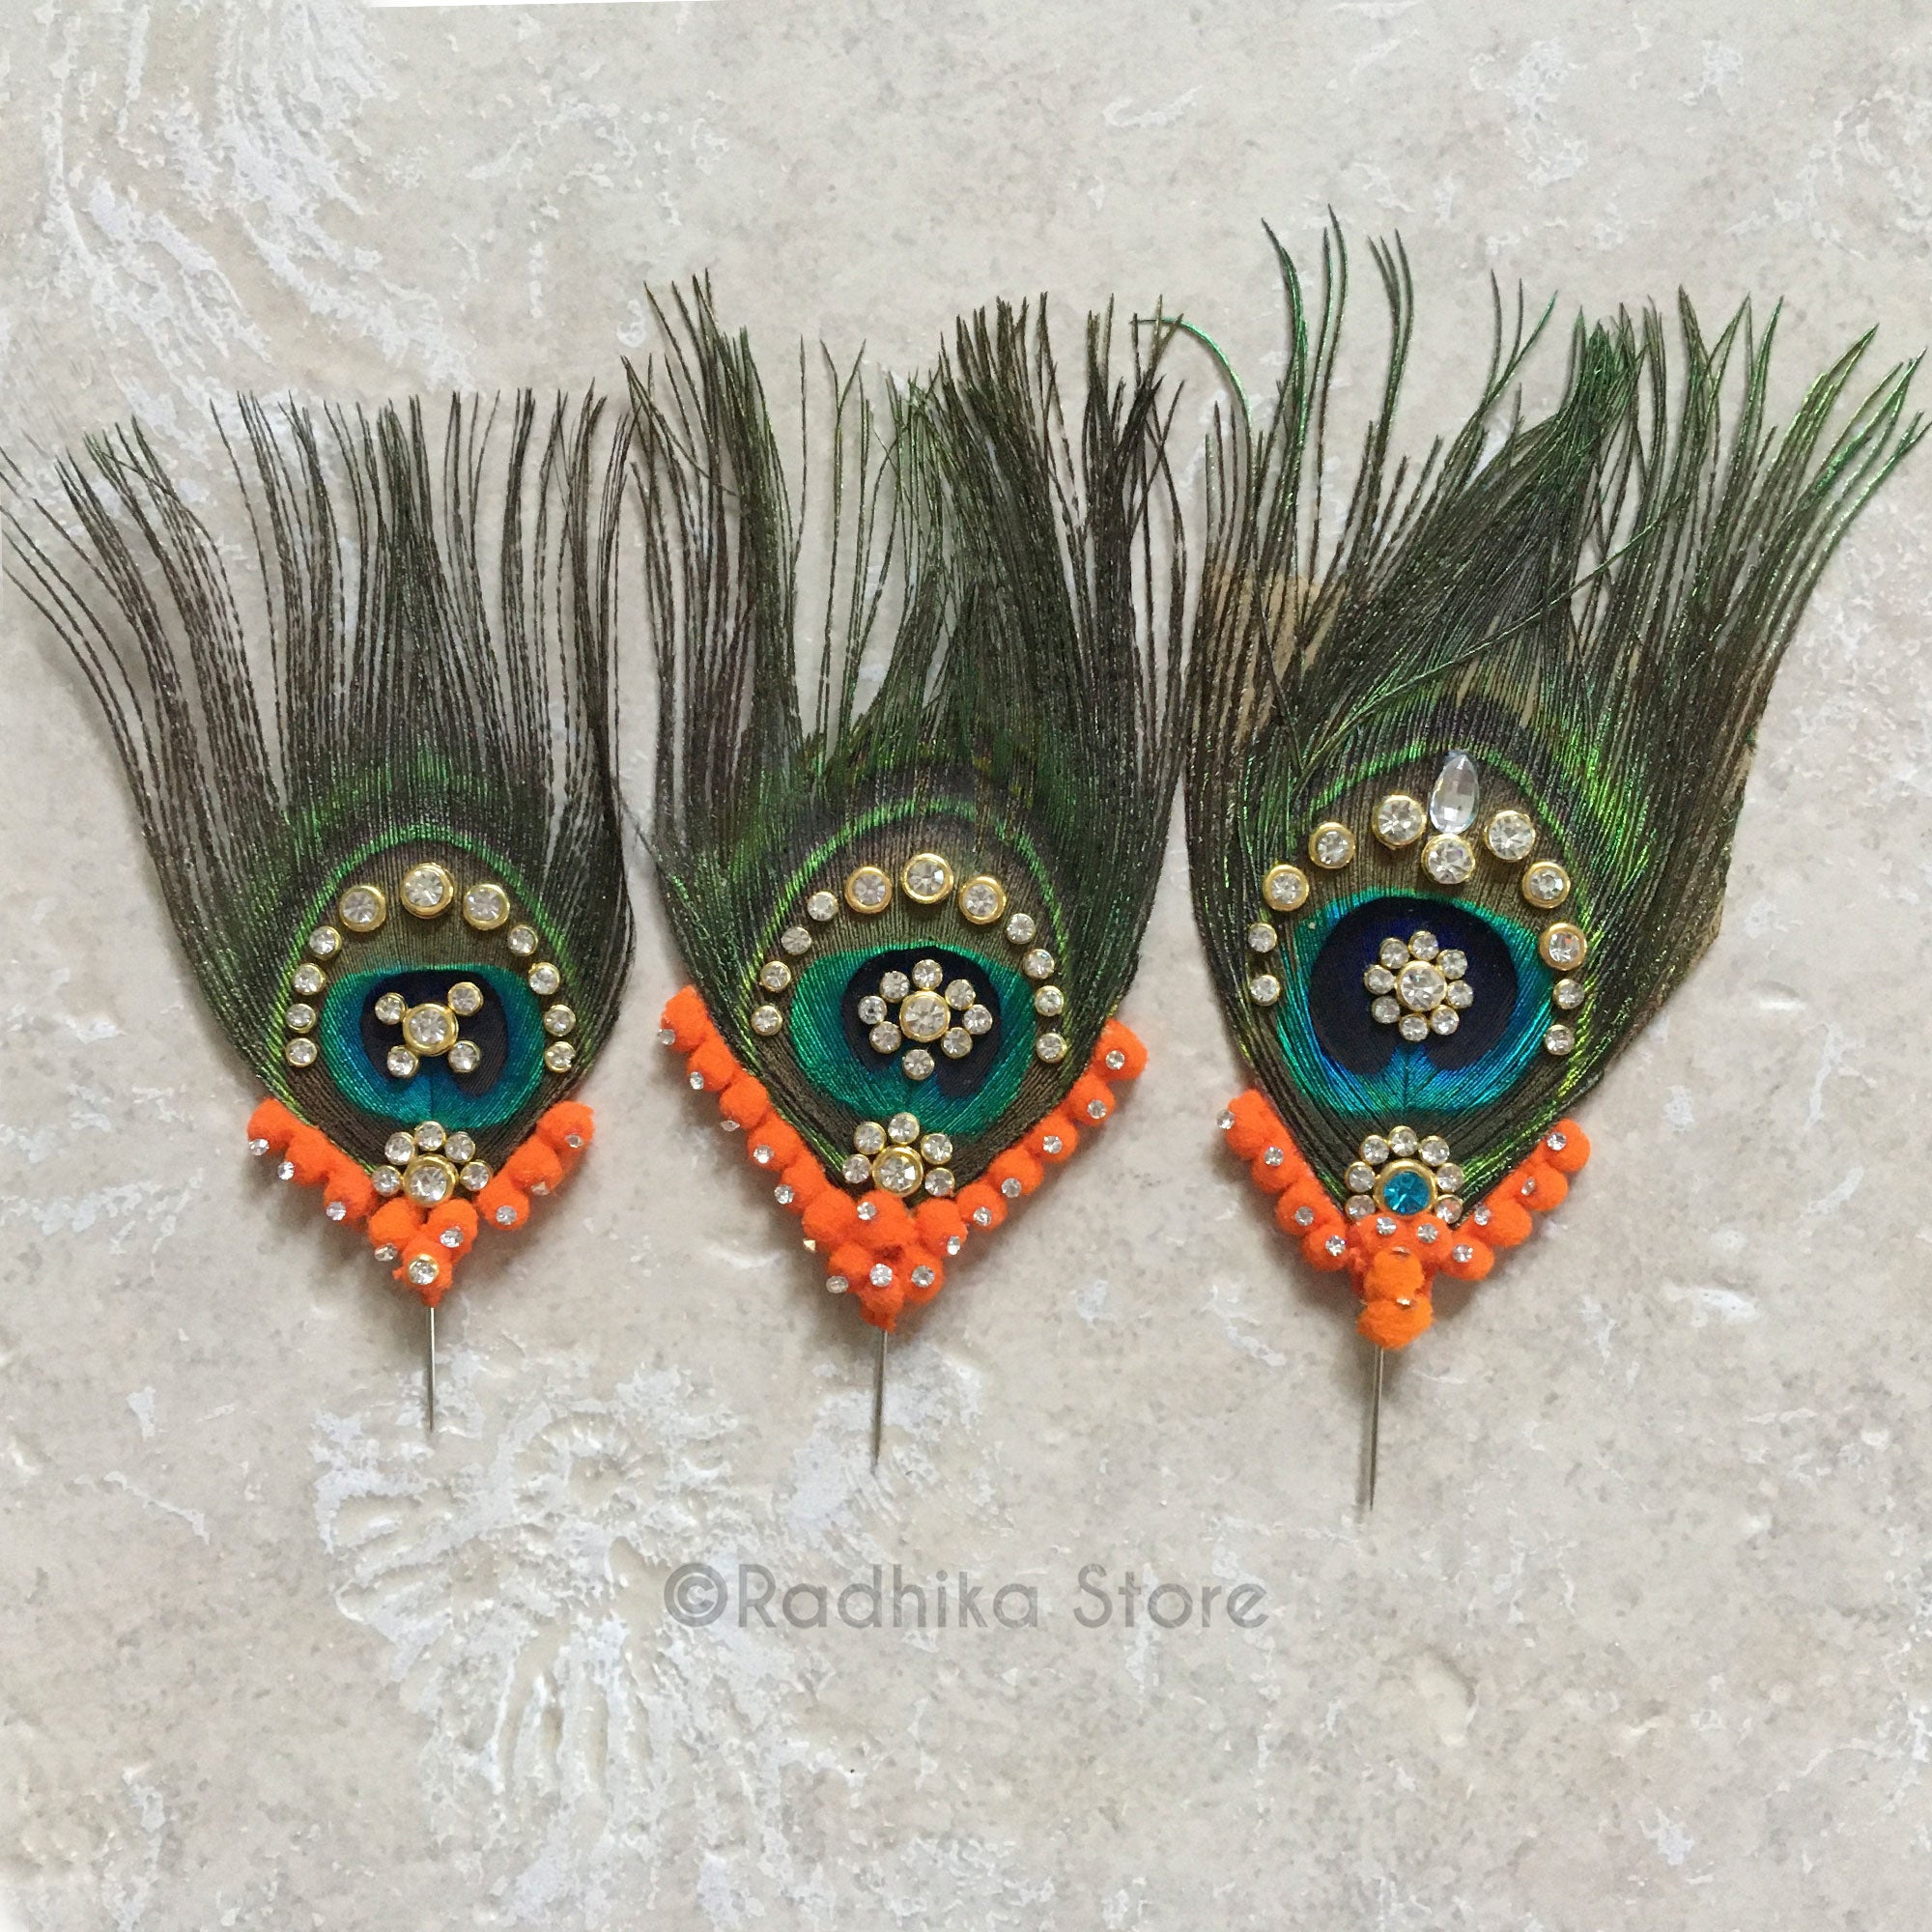 Extra Large Crystal Peacock Feathers -Orange Color